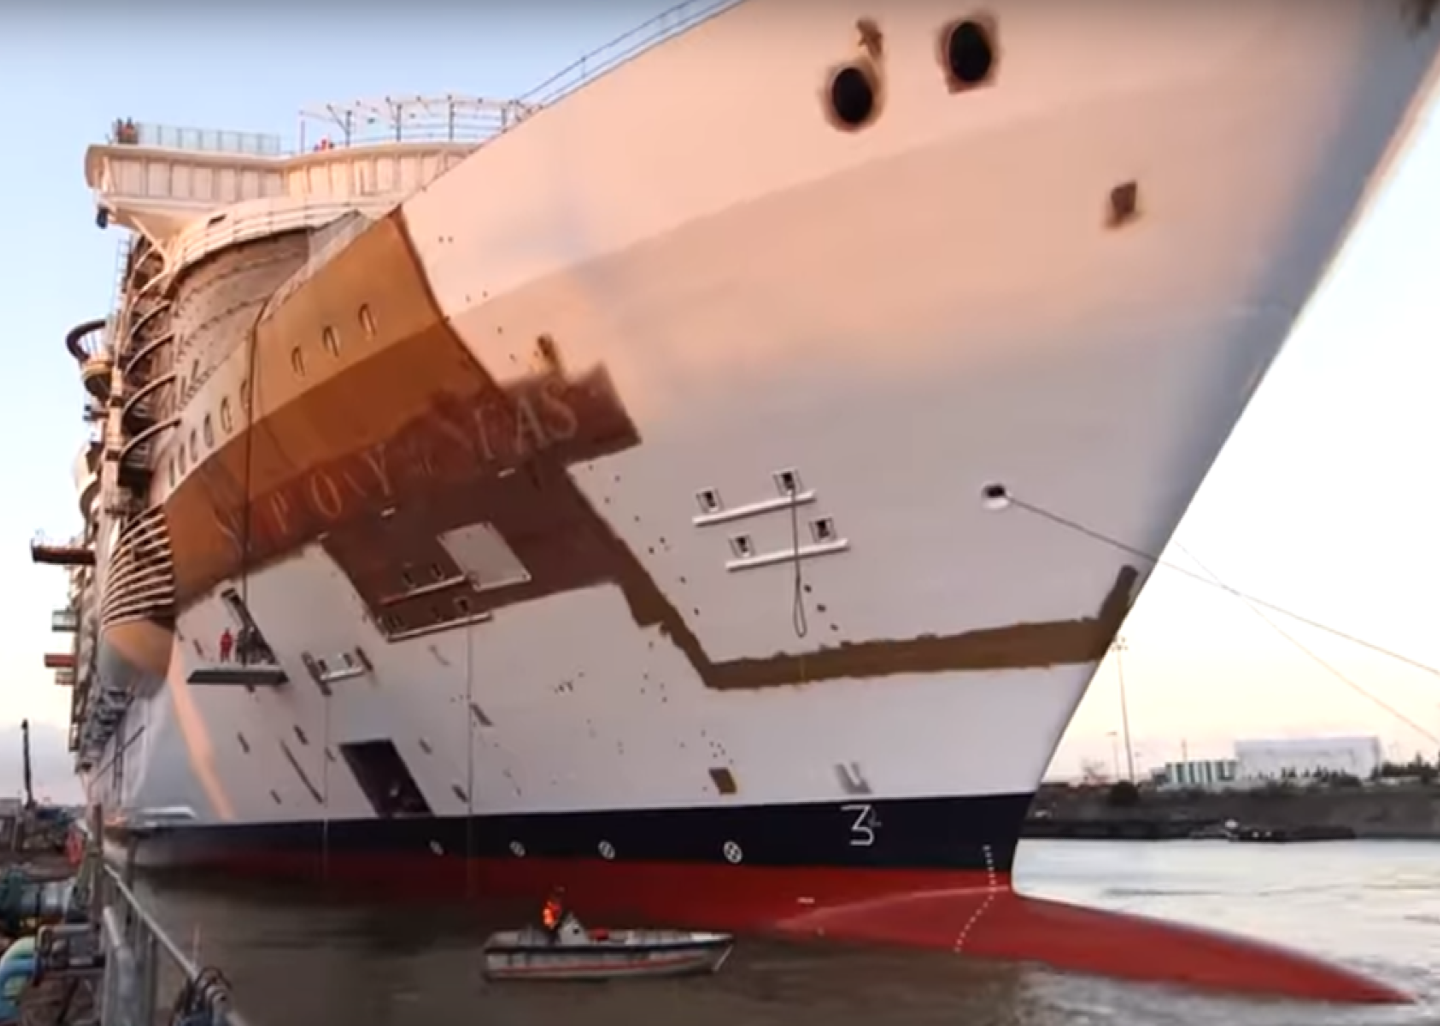 Royal Caribbean builds the largest cruise ship in the world